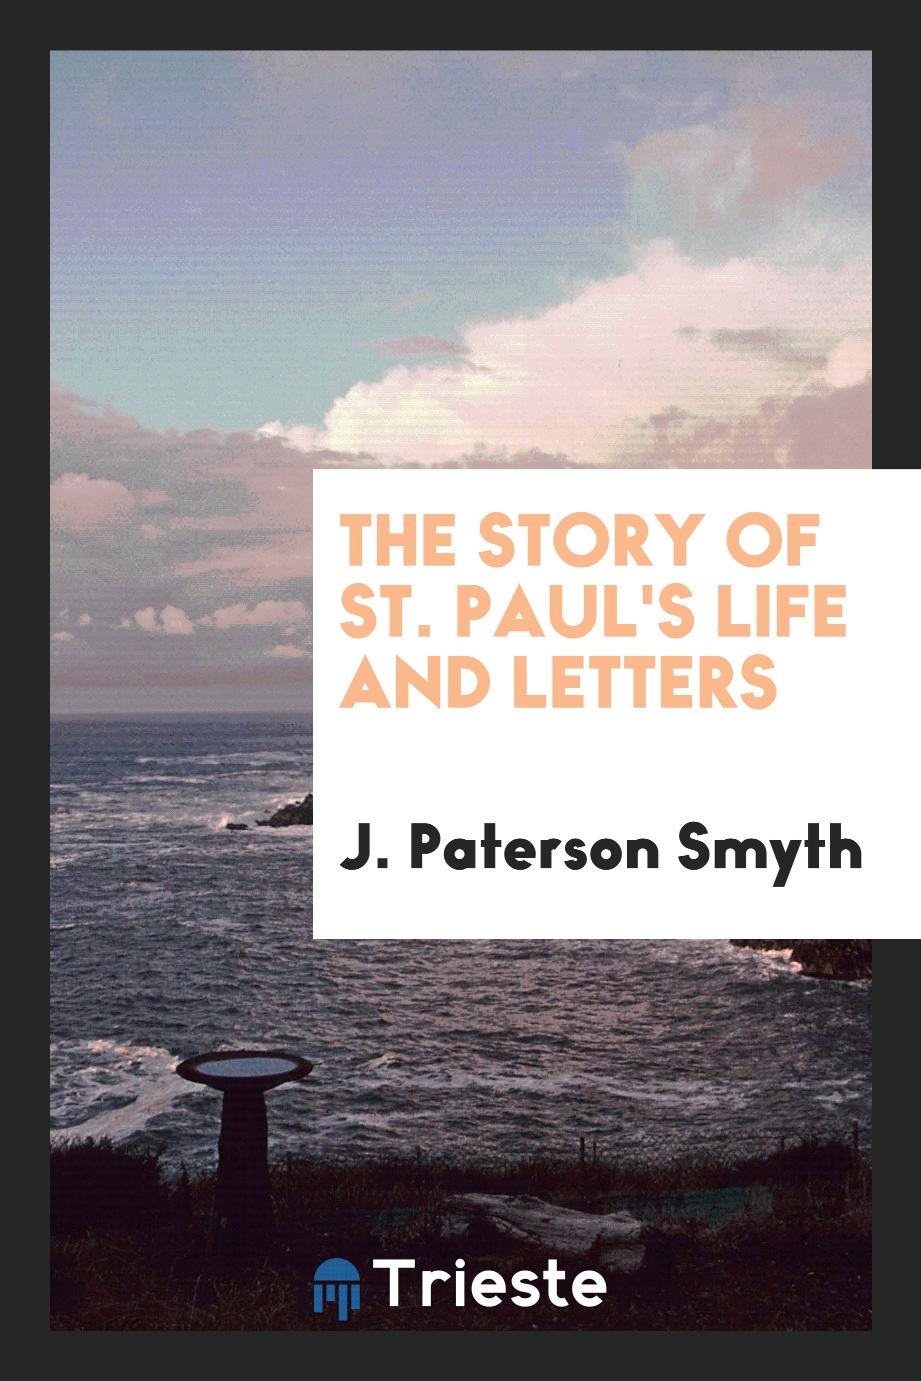 The story of St. Paul's life and letters